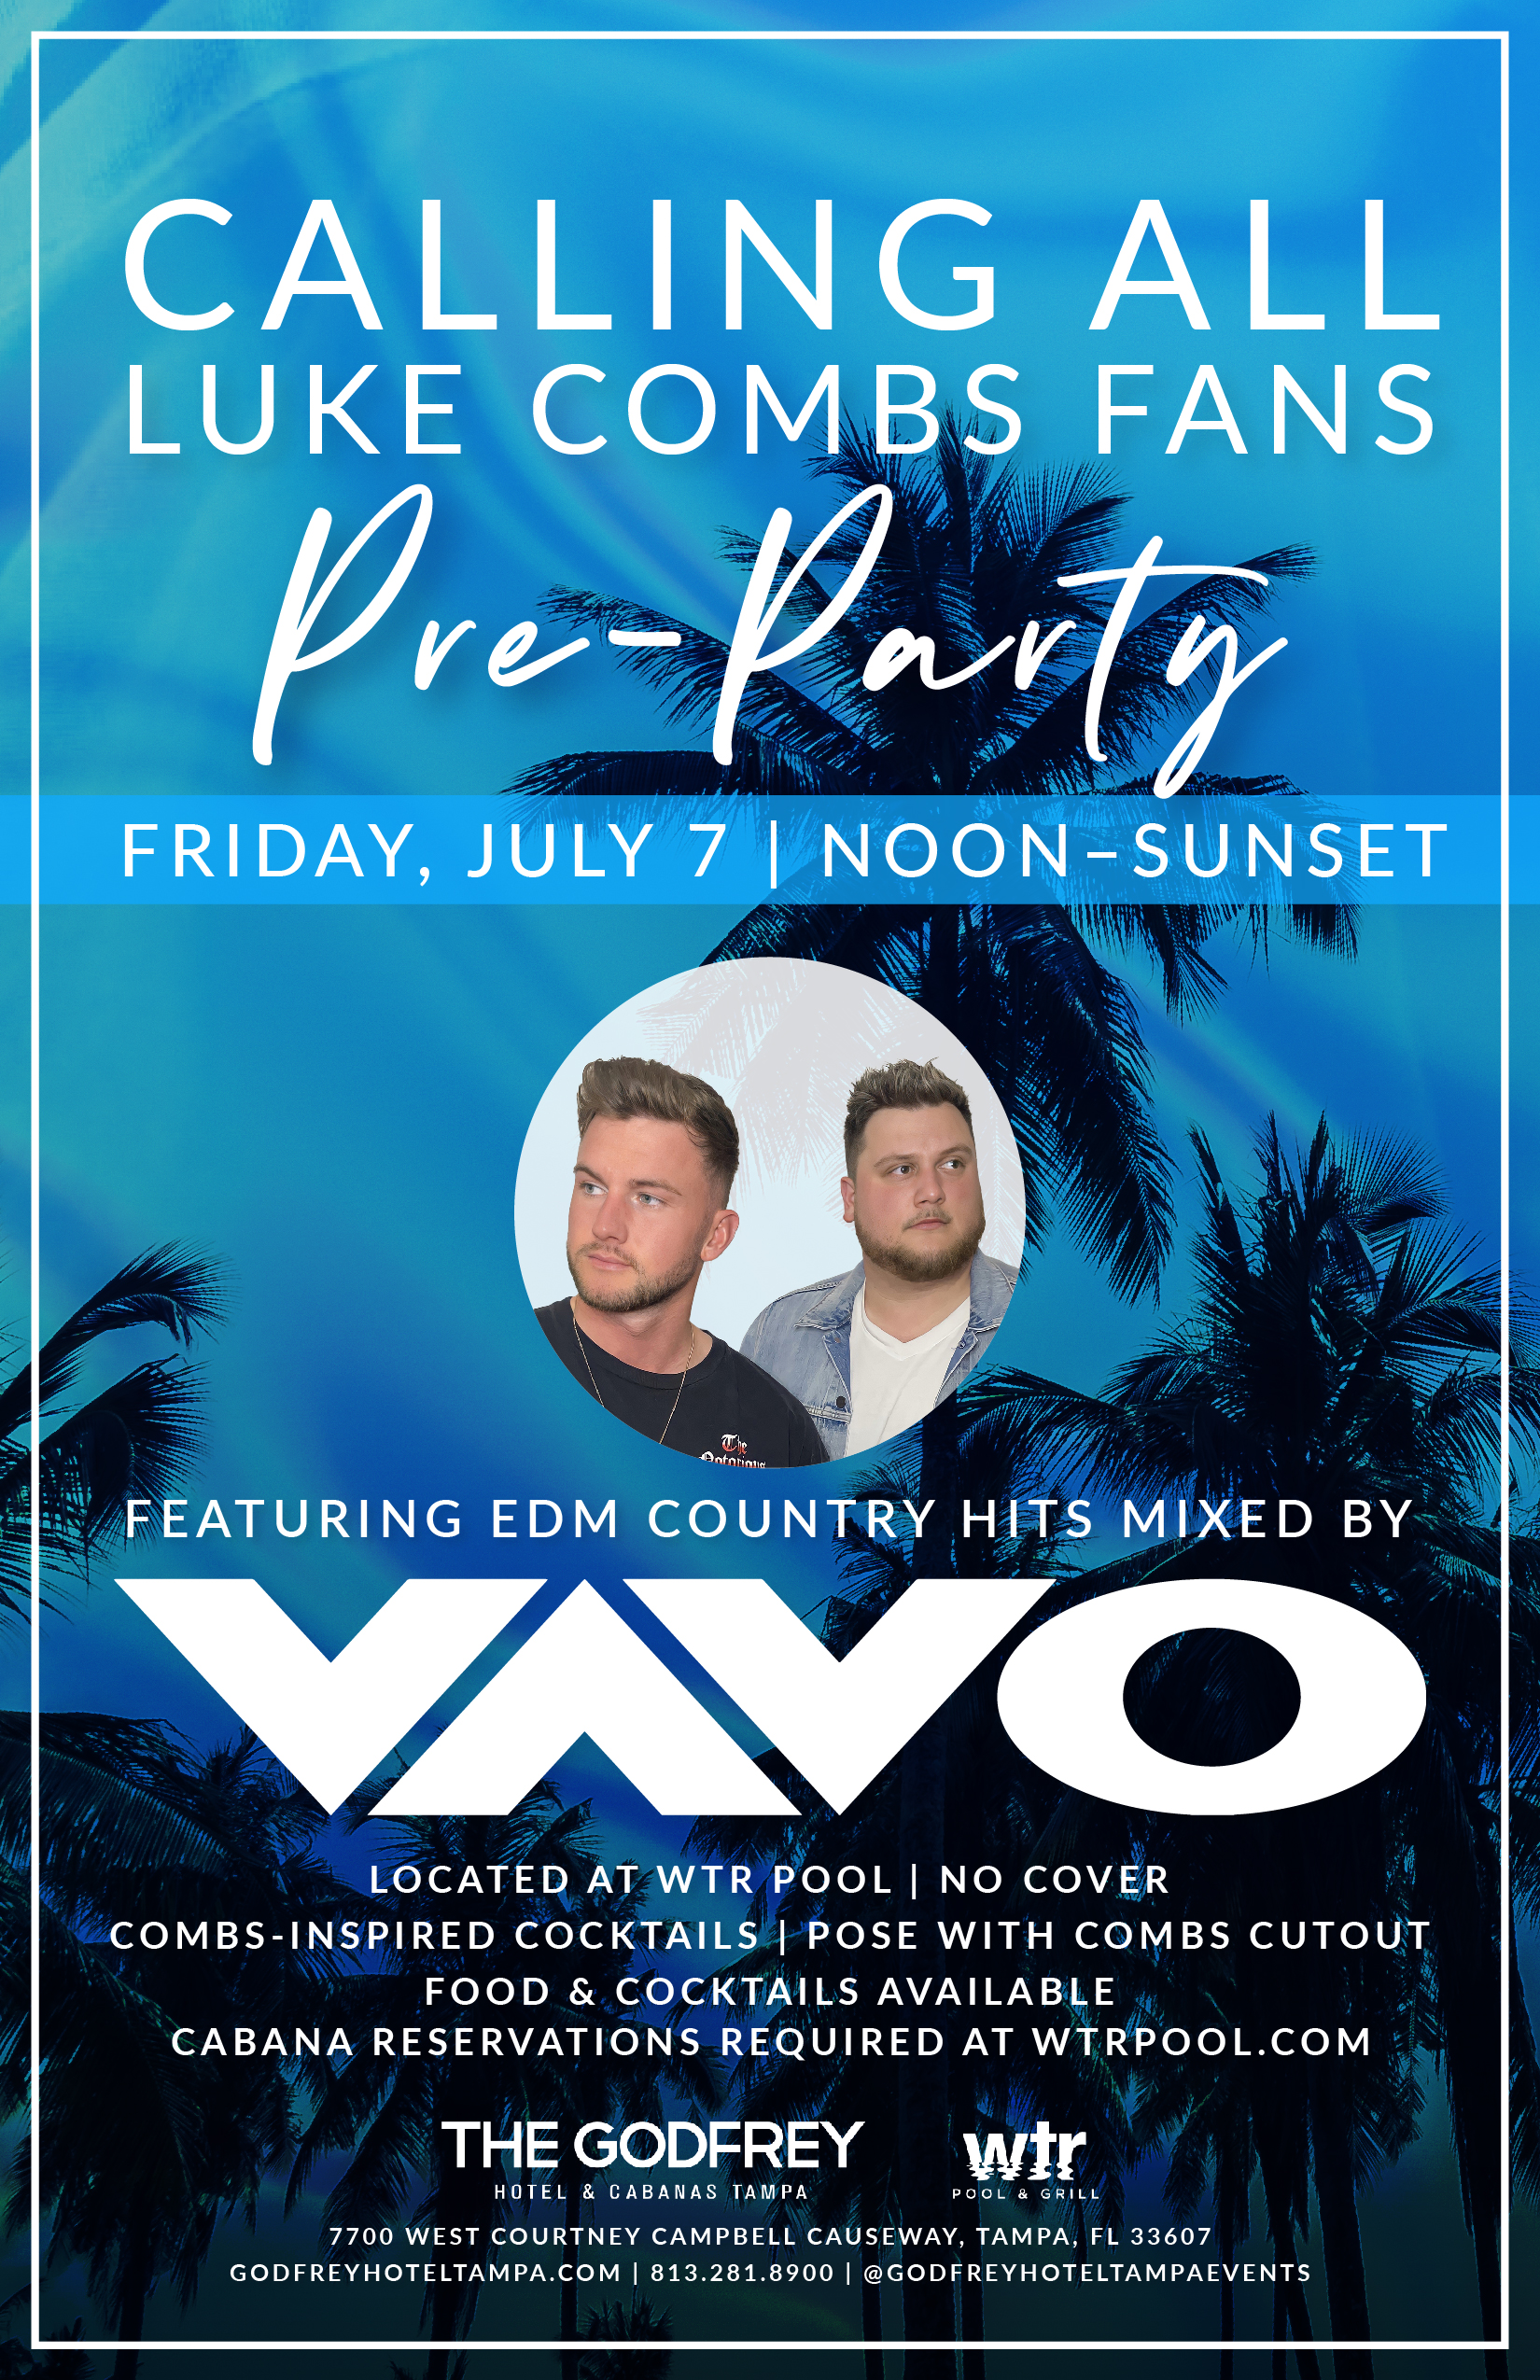 Godfrey Hotel & Cabanas and WTR Pool Brings “YEEDM” to the Tampa Bay for Luke Combs Pre-Party